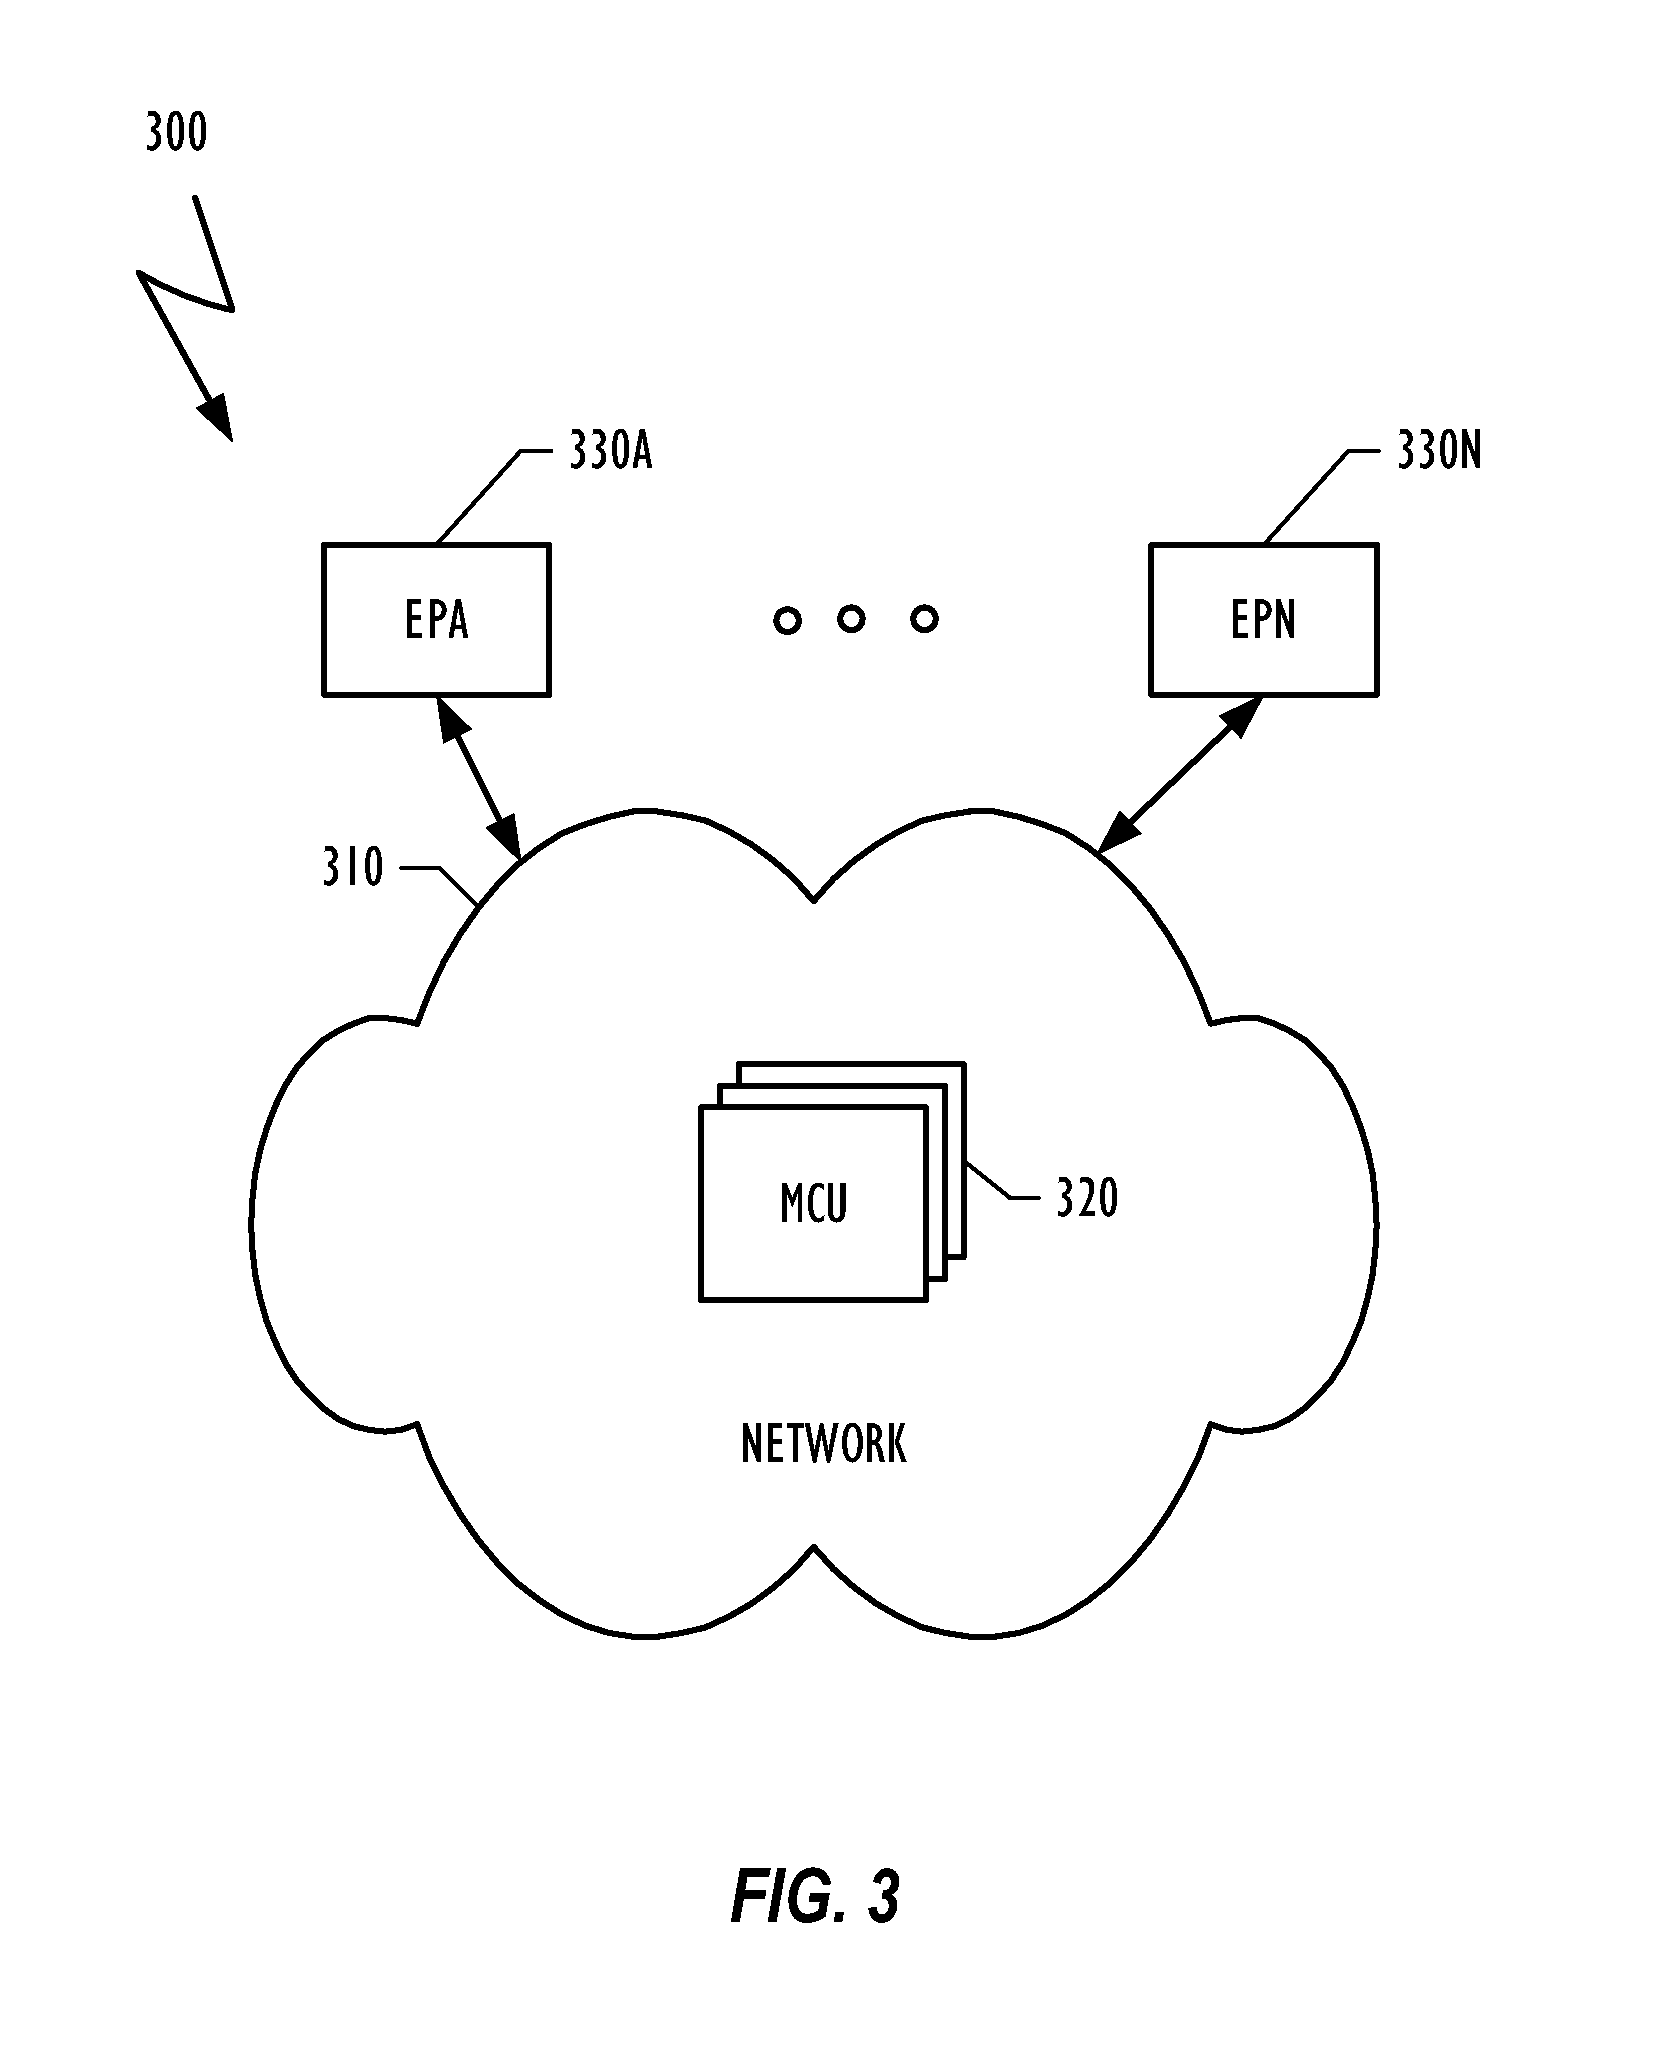 Method and System for Adapting A CP Layout According to Interaction Between Conferees